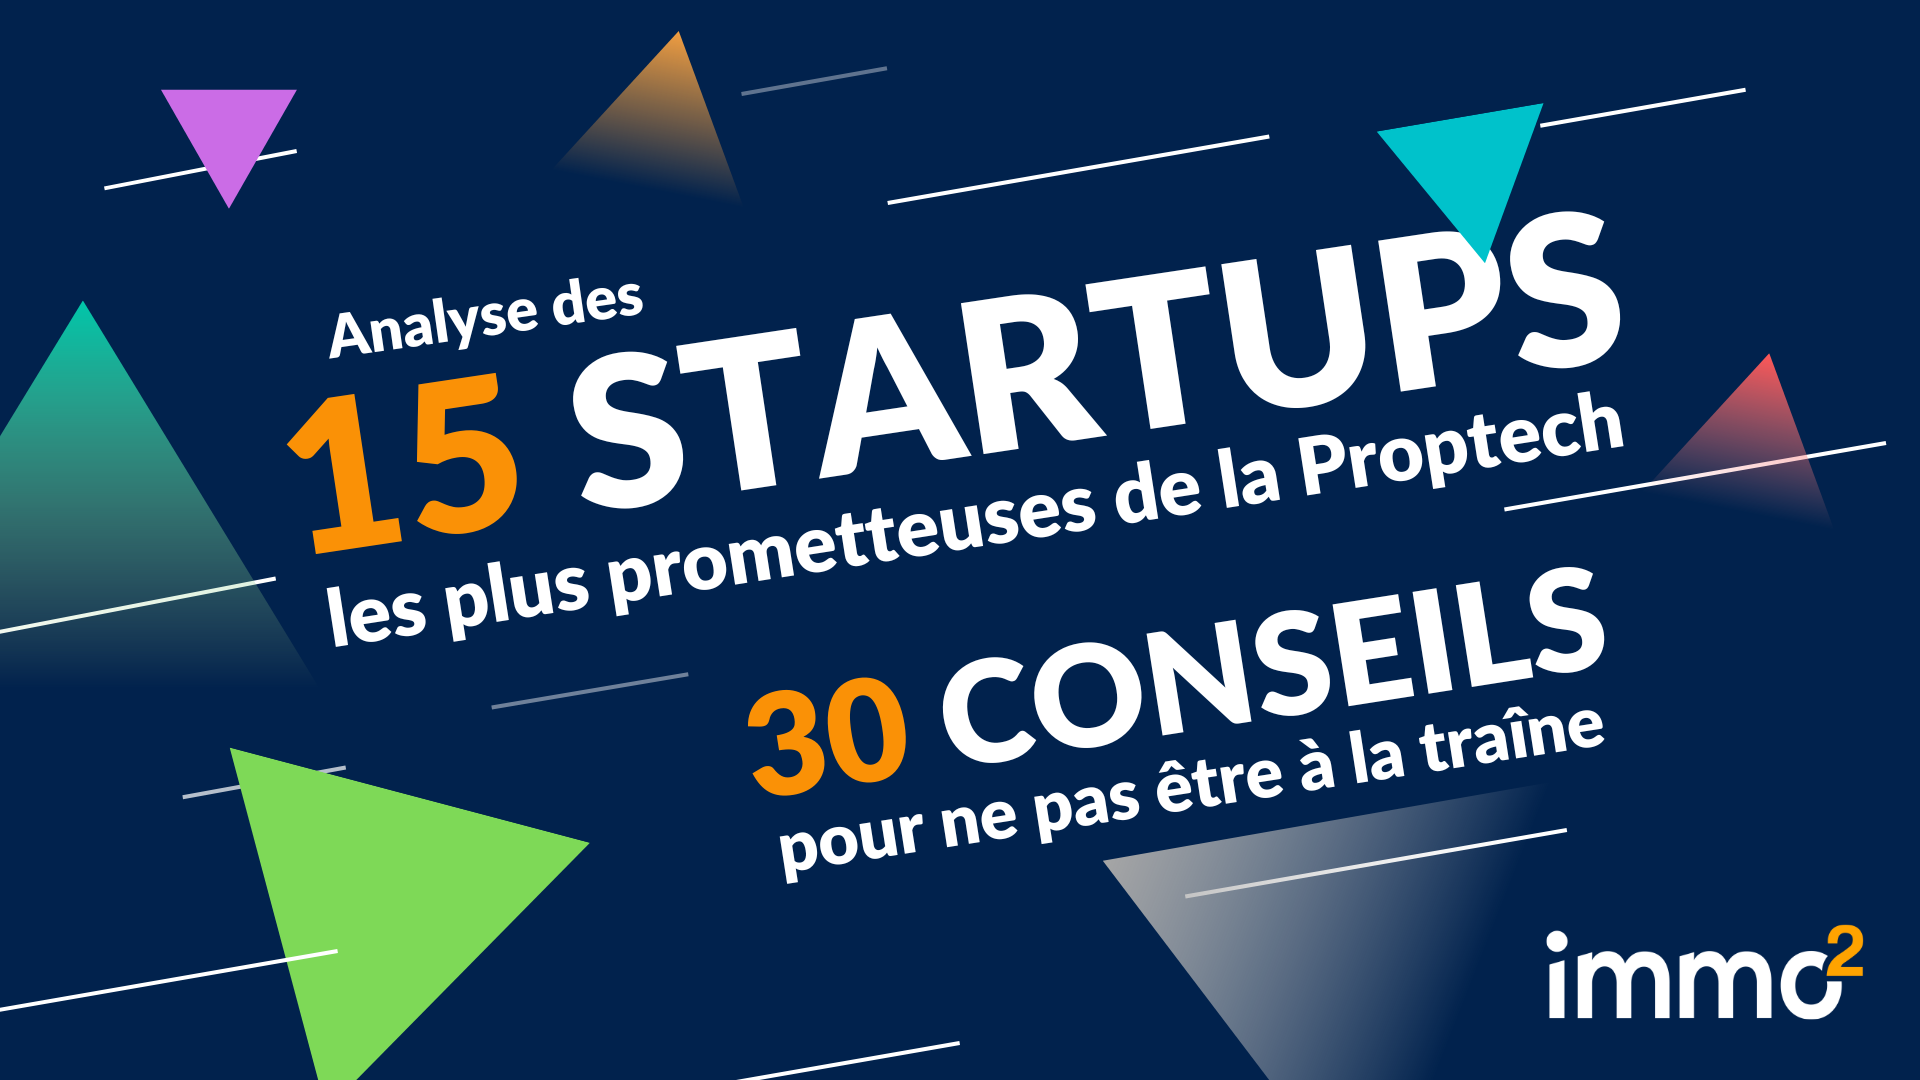 Startups innovantes proptech immobilier